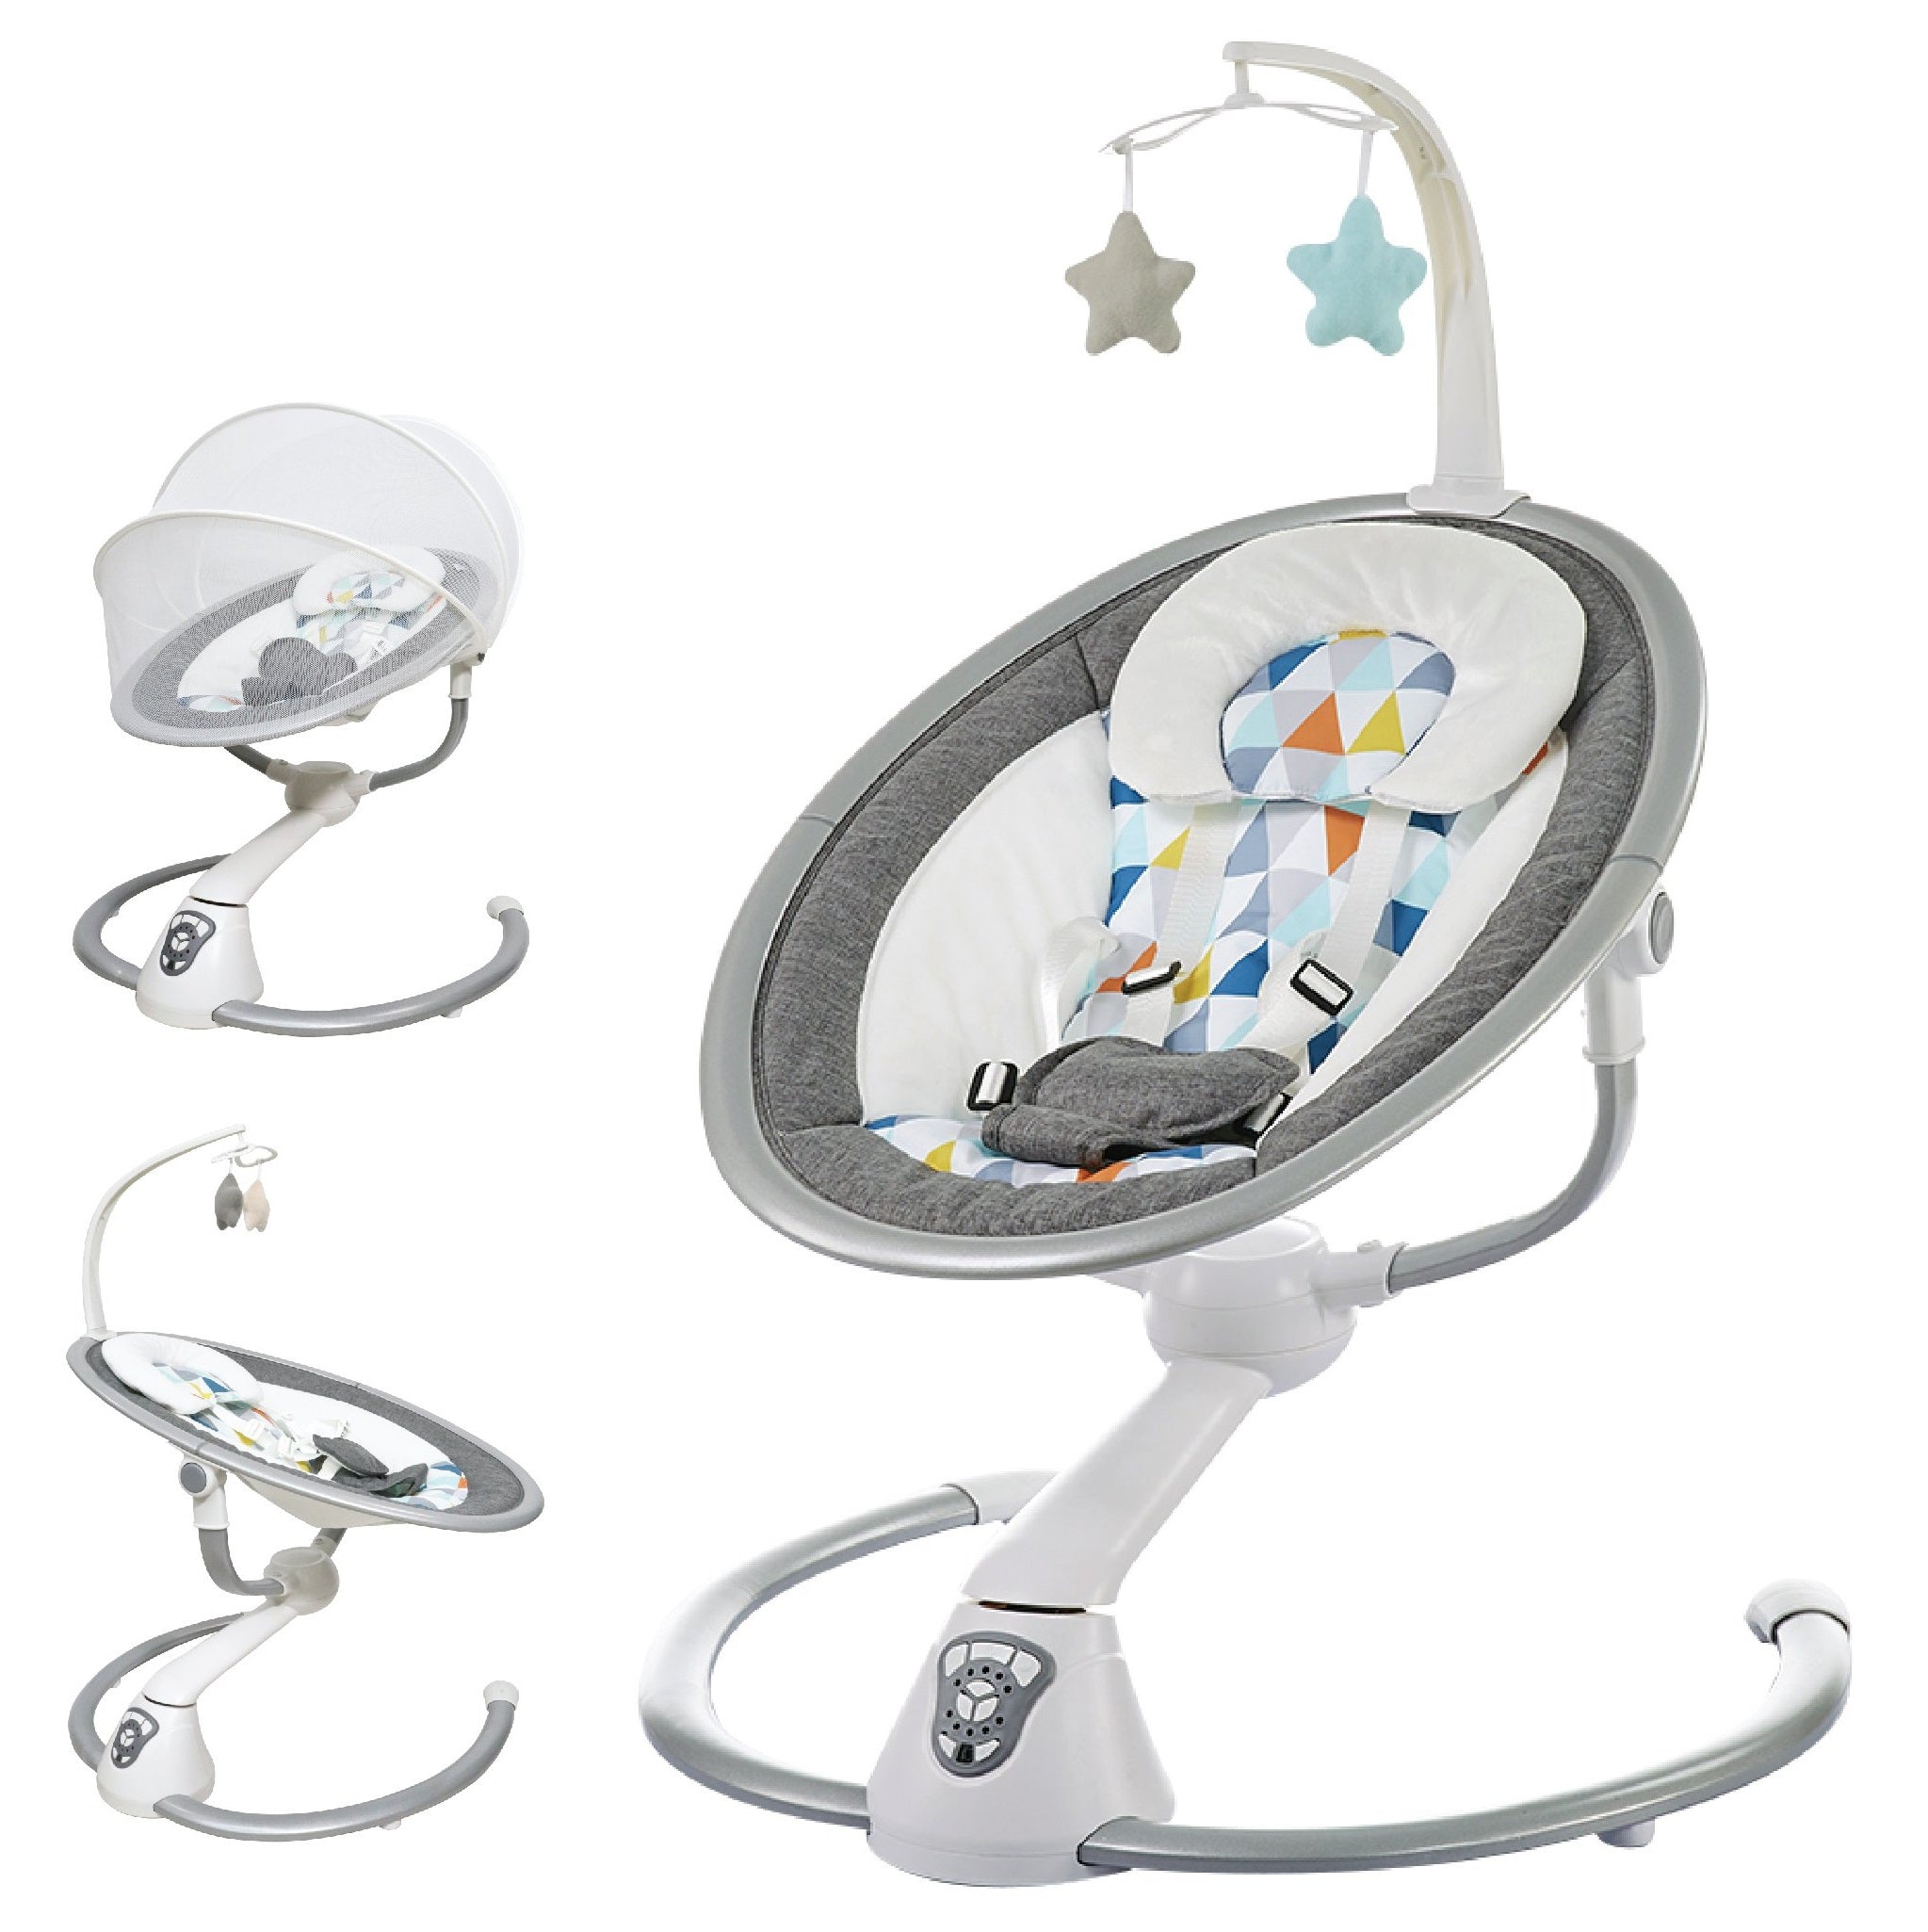 Louis Baby Swing Electric Auto Cradle Swing Chair with Music for Newborn Baby (BAY0144)